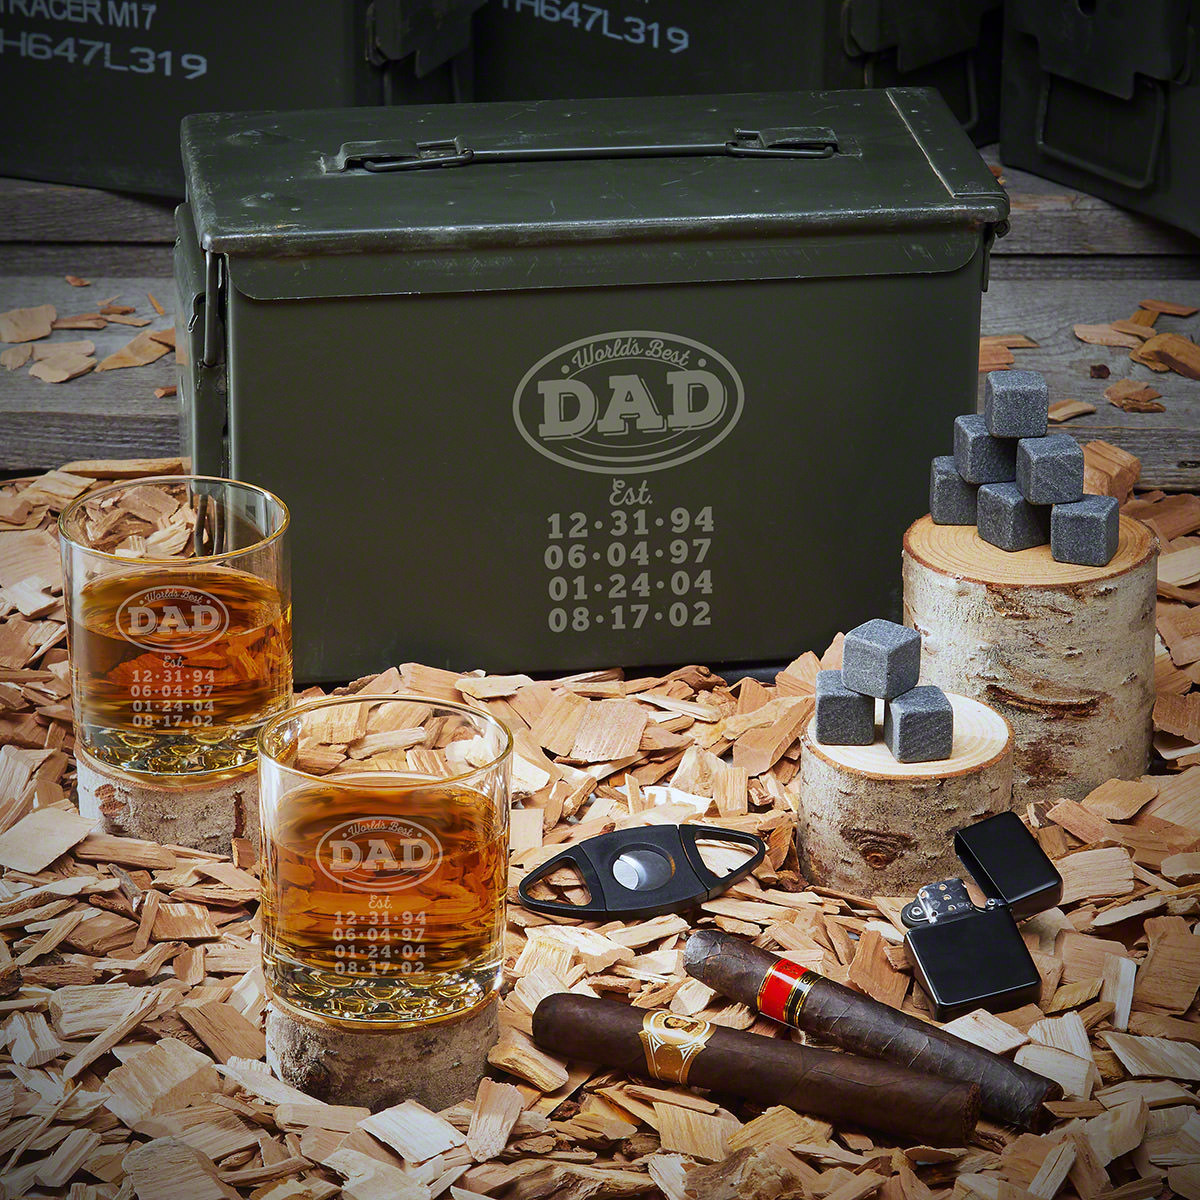 Your dad had his hands full raising a household of kids, but he loved every second of it. Now you can show your appreciation with one of those custom and unique gifts for Dad. A genuine U.S. military 50-caliber ammo can filled to the brim with his favorit #best